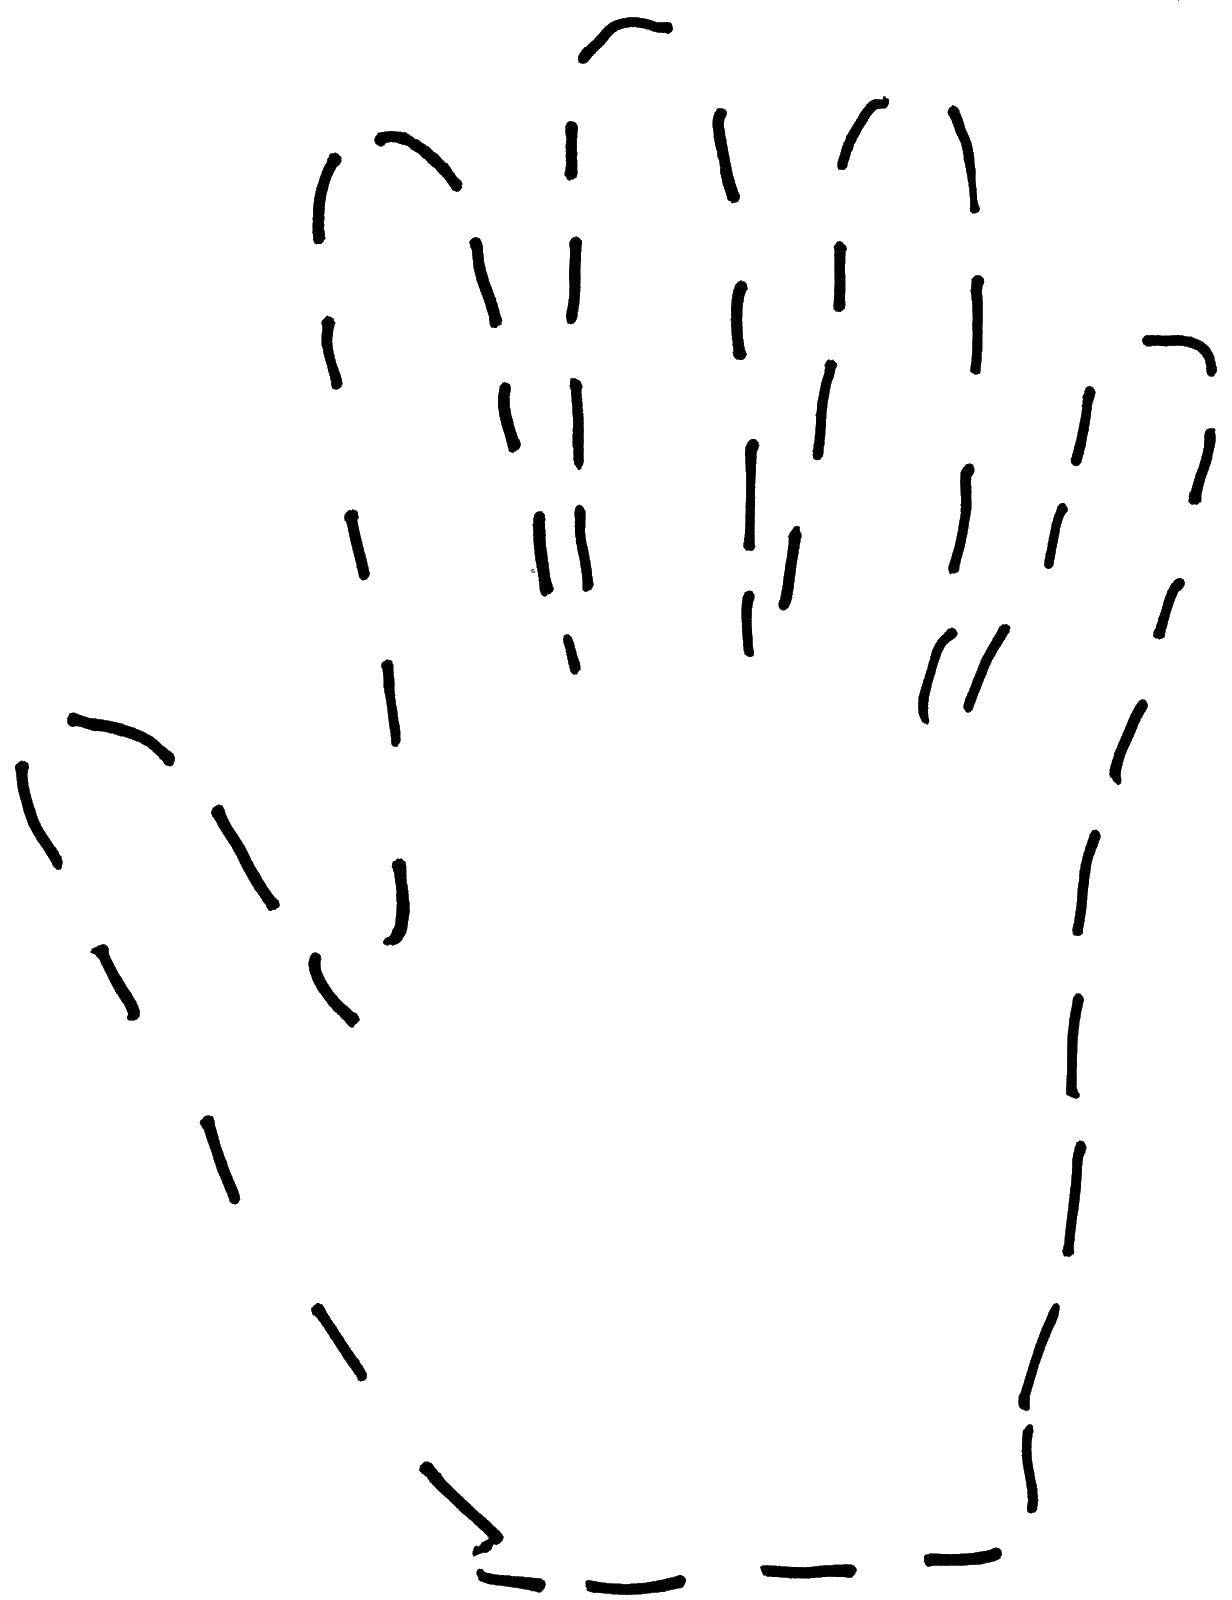 Coloring Dotted palm. Category The contour of the hands and palms to cut. Tags:  Hand, brush.